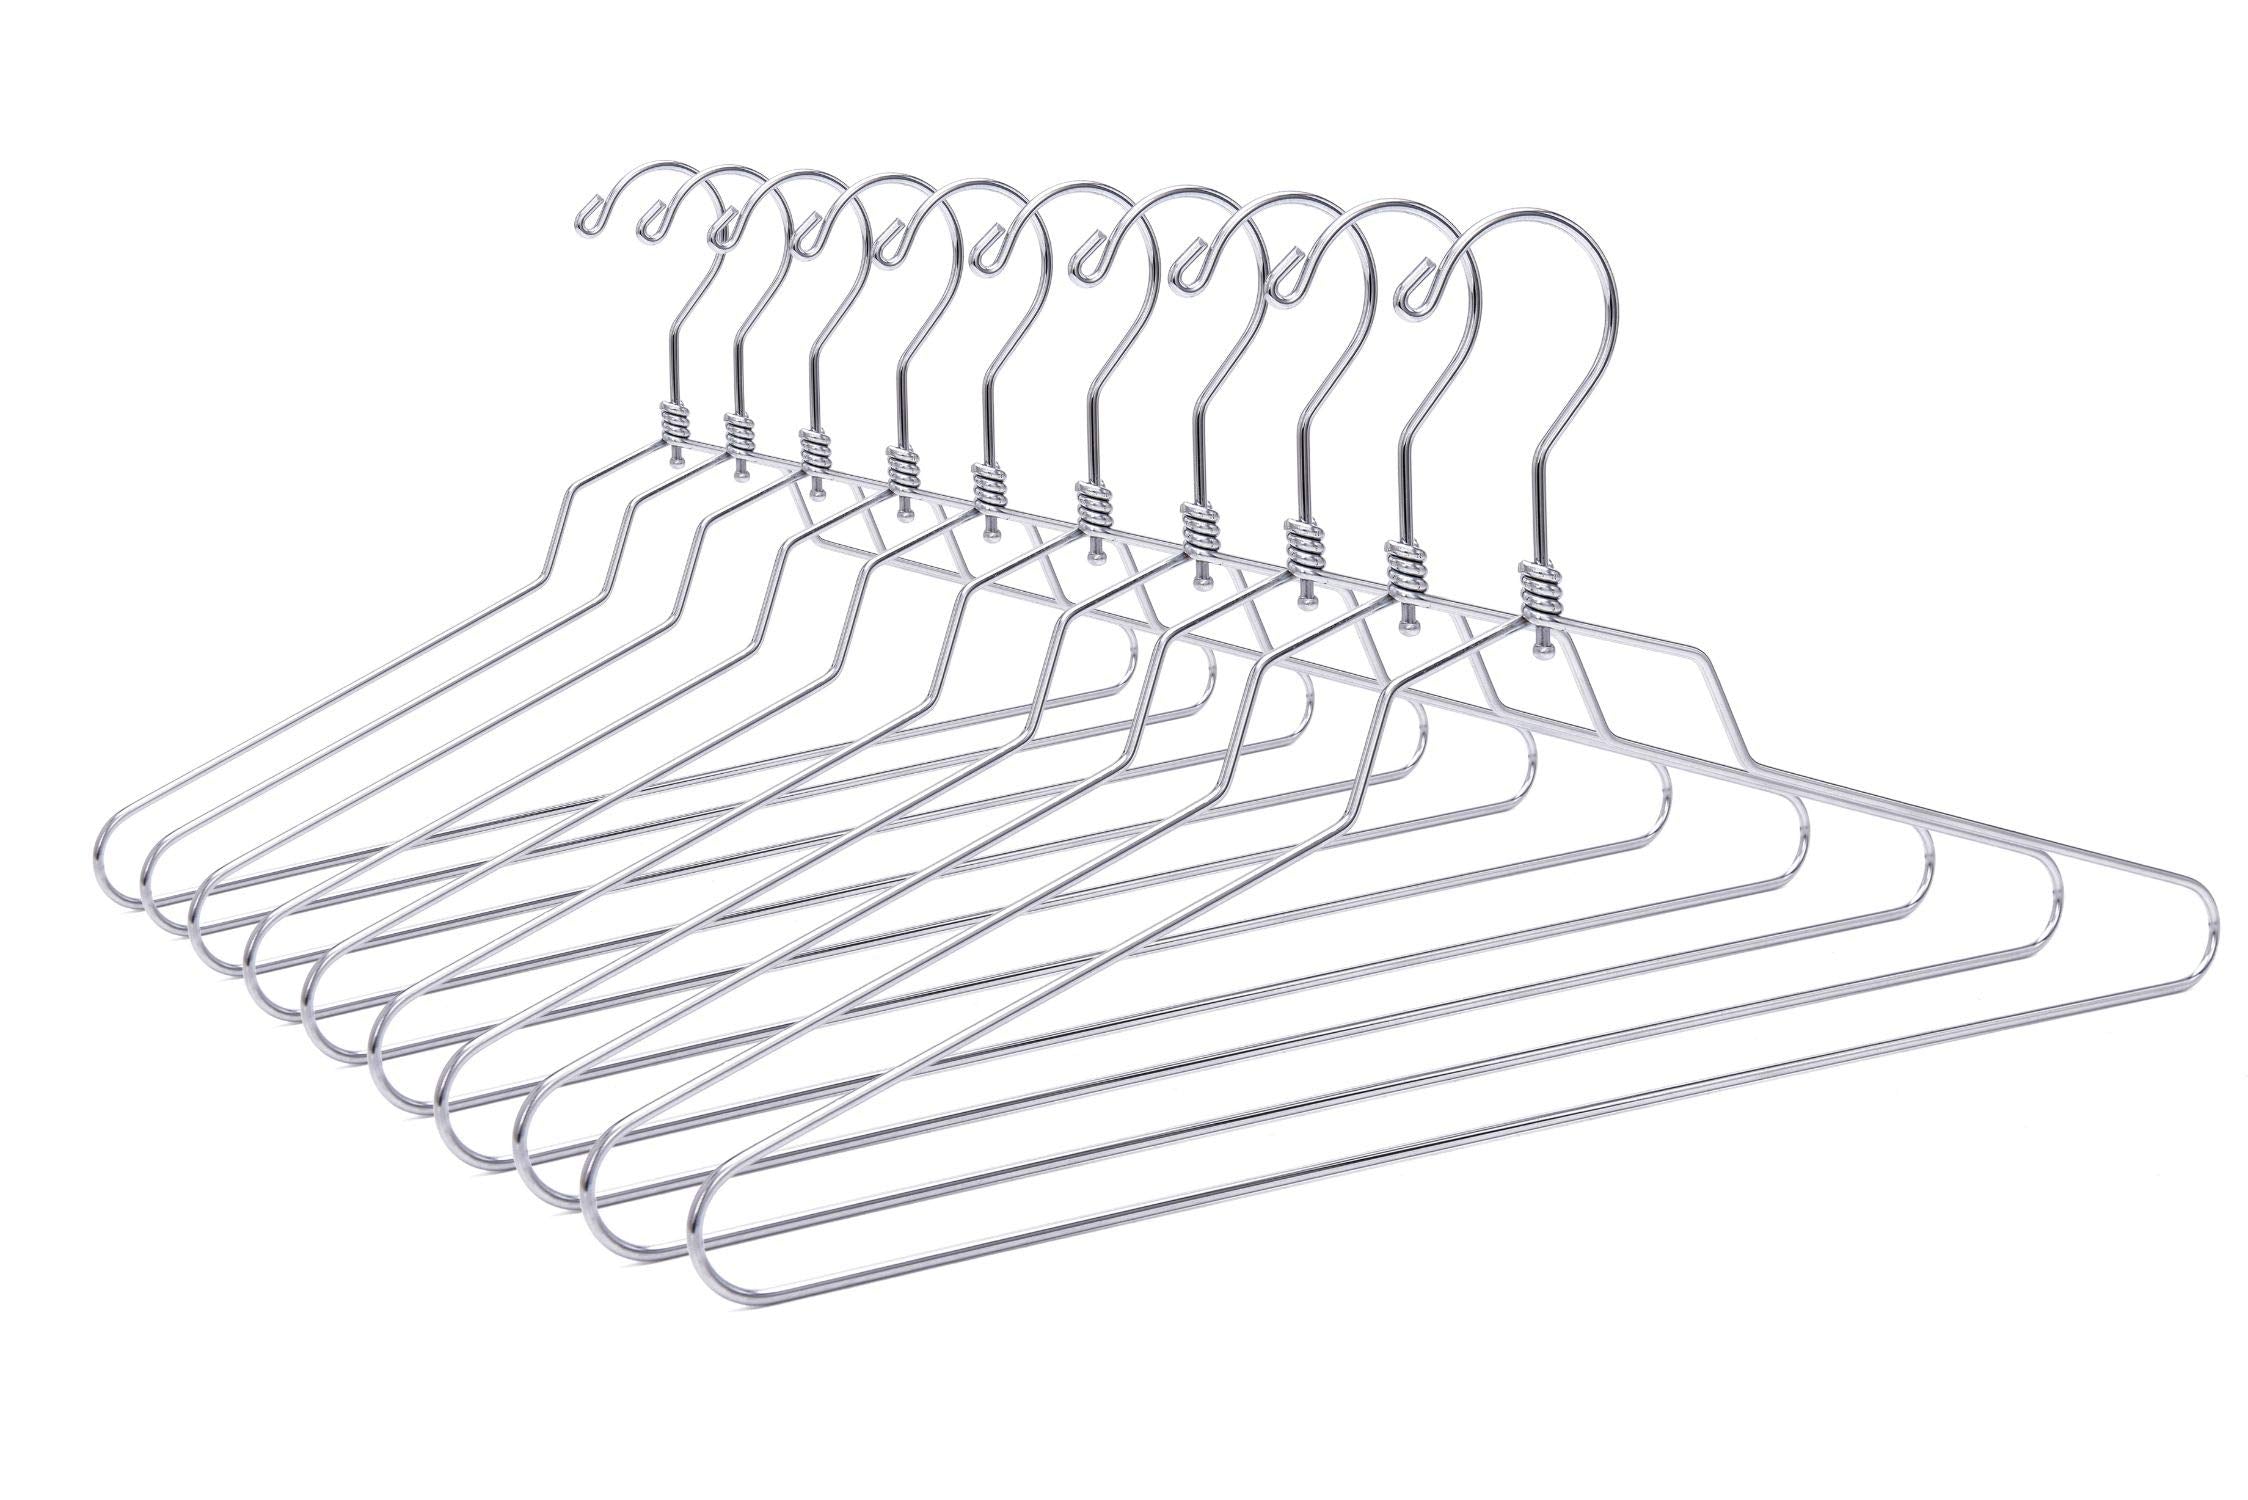 16" Quality Metal Hangers, 30-Pack, Swivel Hook, Stainless Steel Heavy Duty Wire Clothes Hangers, Heavy-Duty Clothes, Jacket, Shirt, Pants, Suit Hangers  - Like New